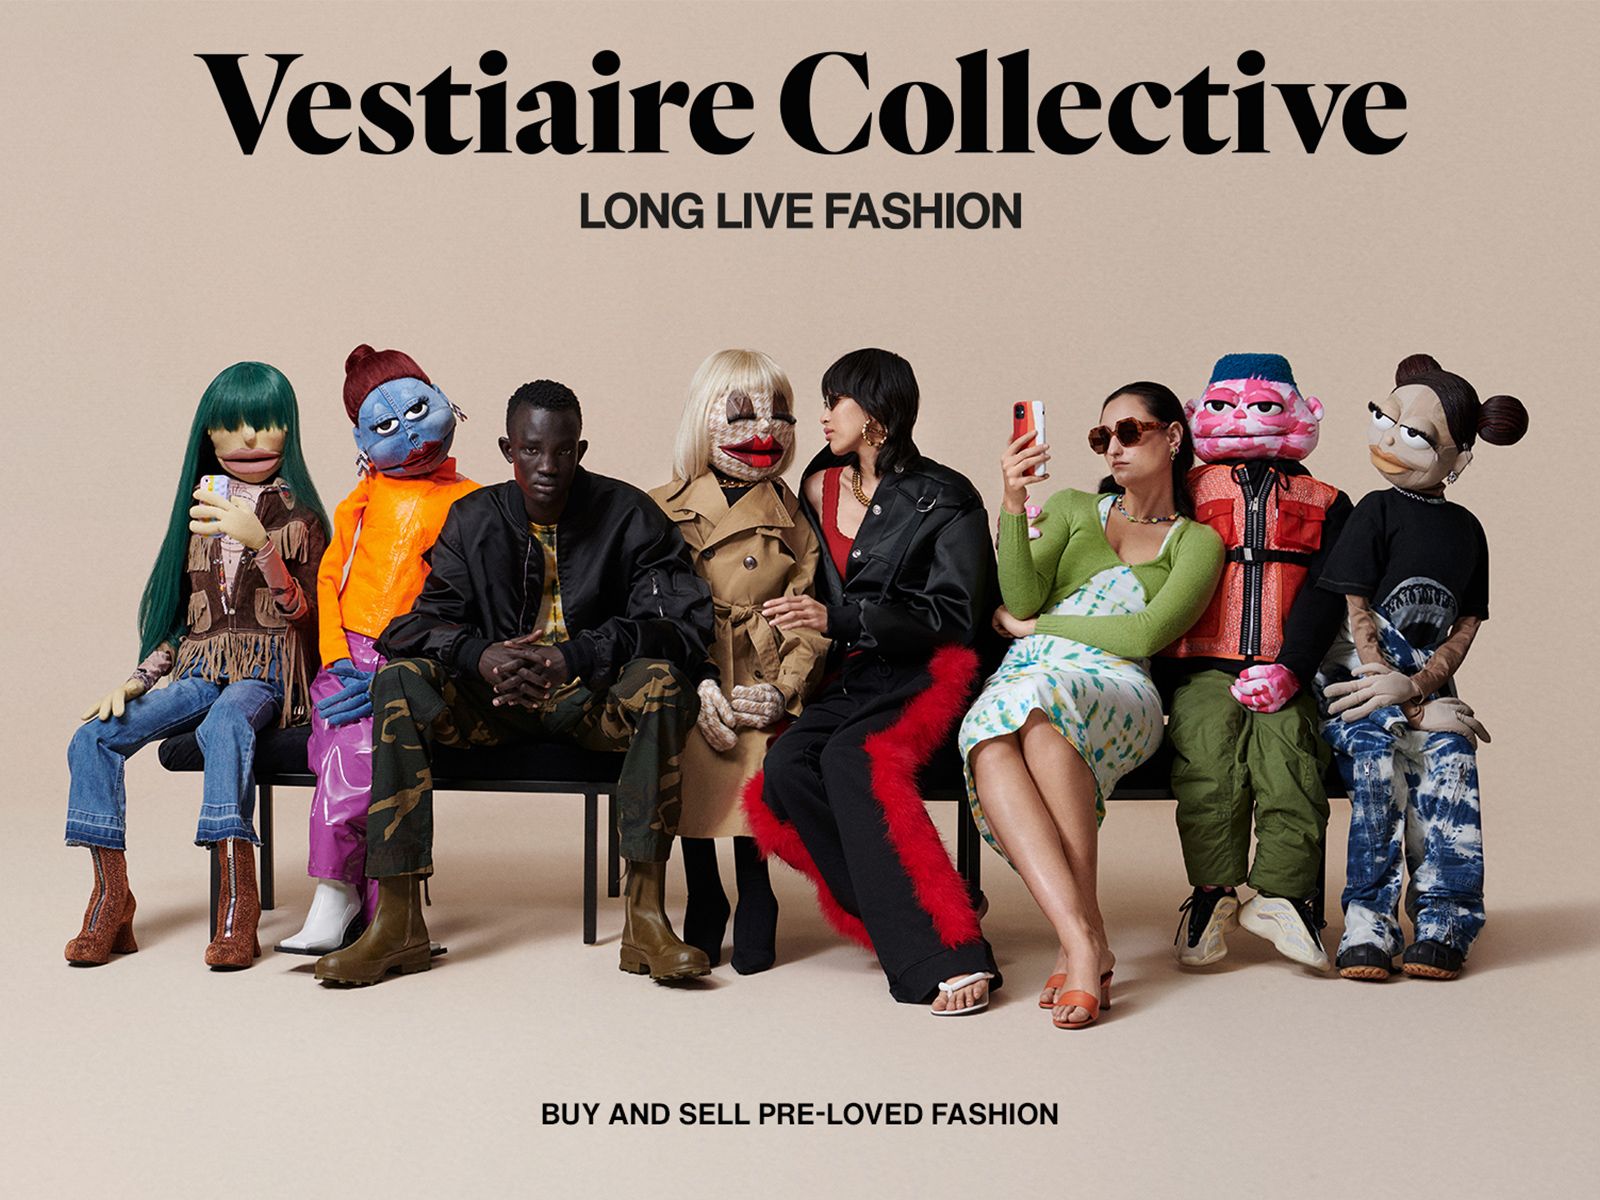 Introducing the Vestiaire Collective! 